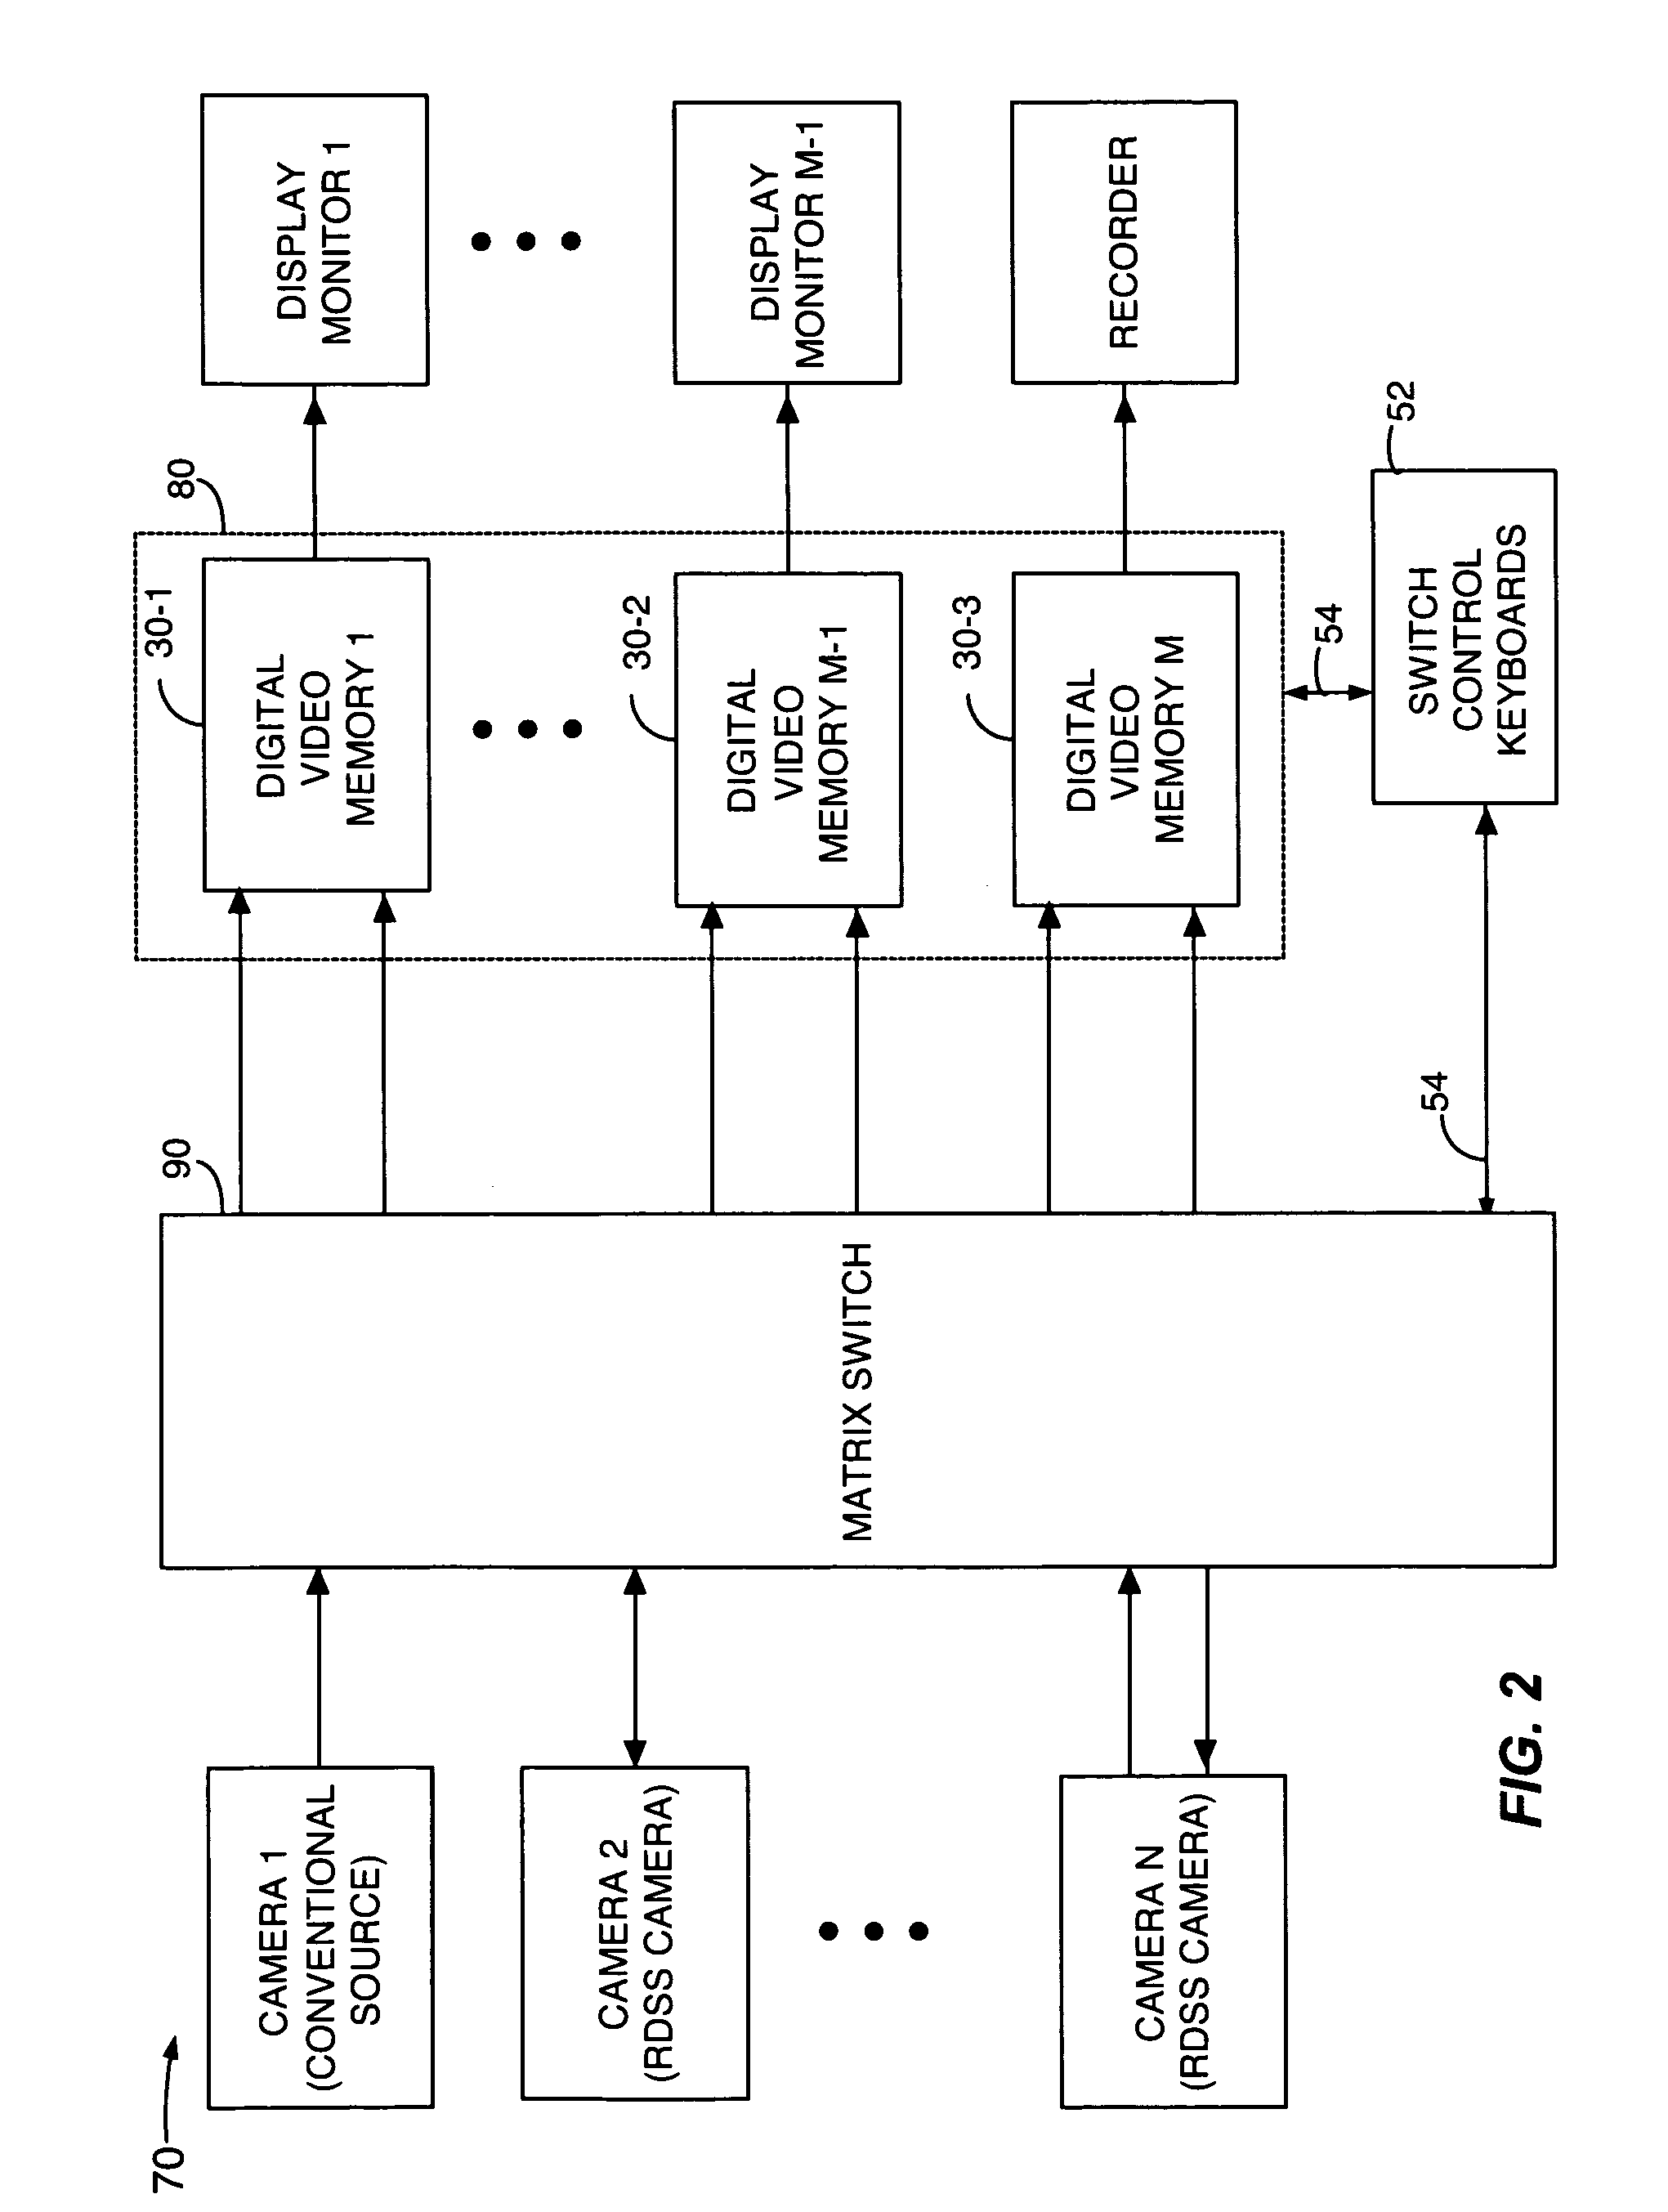 Multi-camera system for implementing digital slow shutter video processing using shared video memory